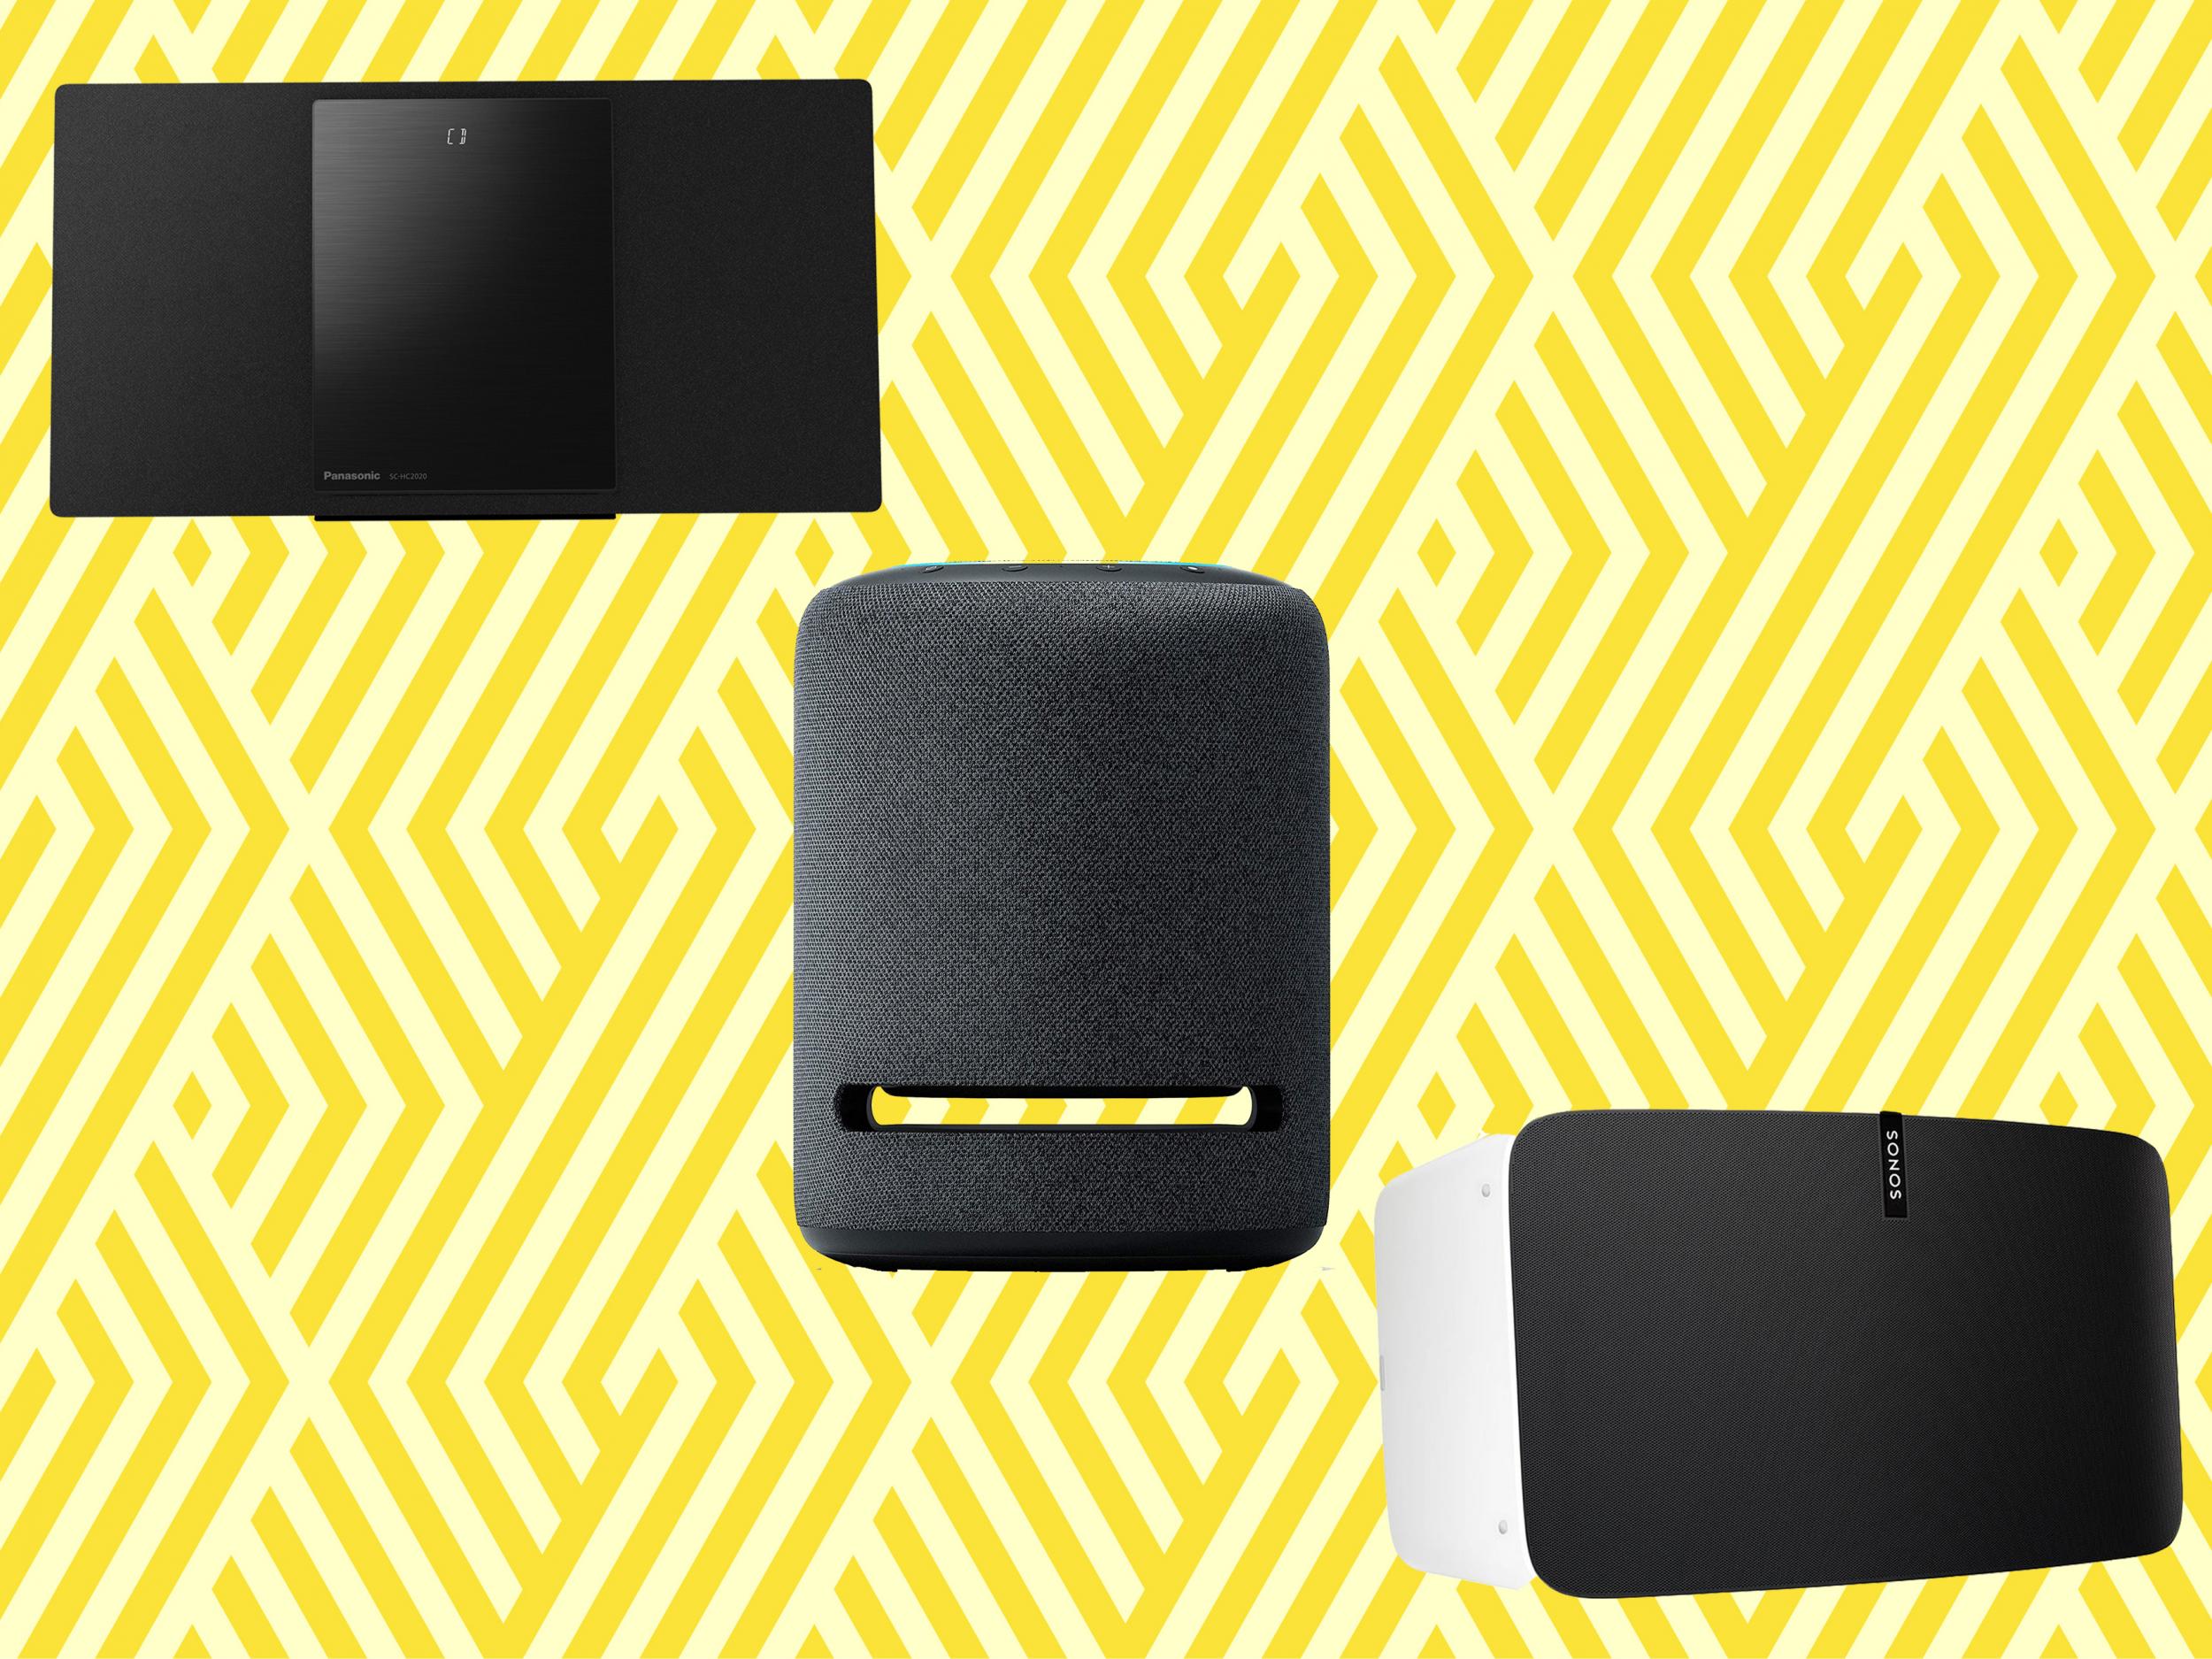 play music on more than one bluetooth speaker